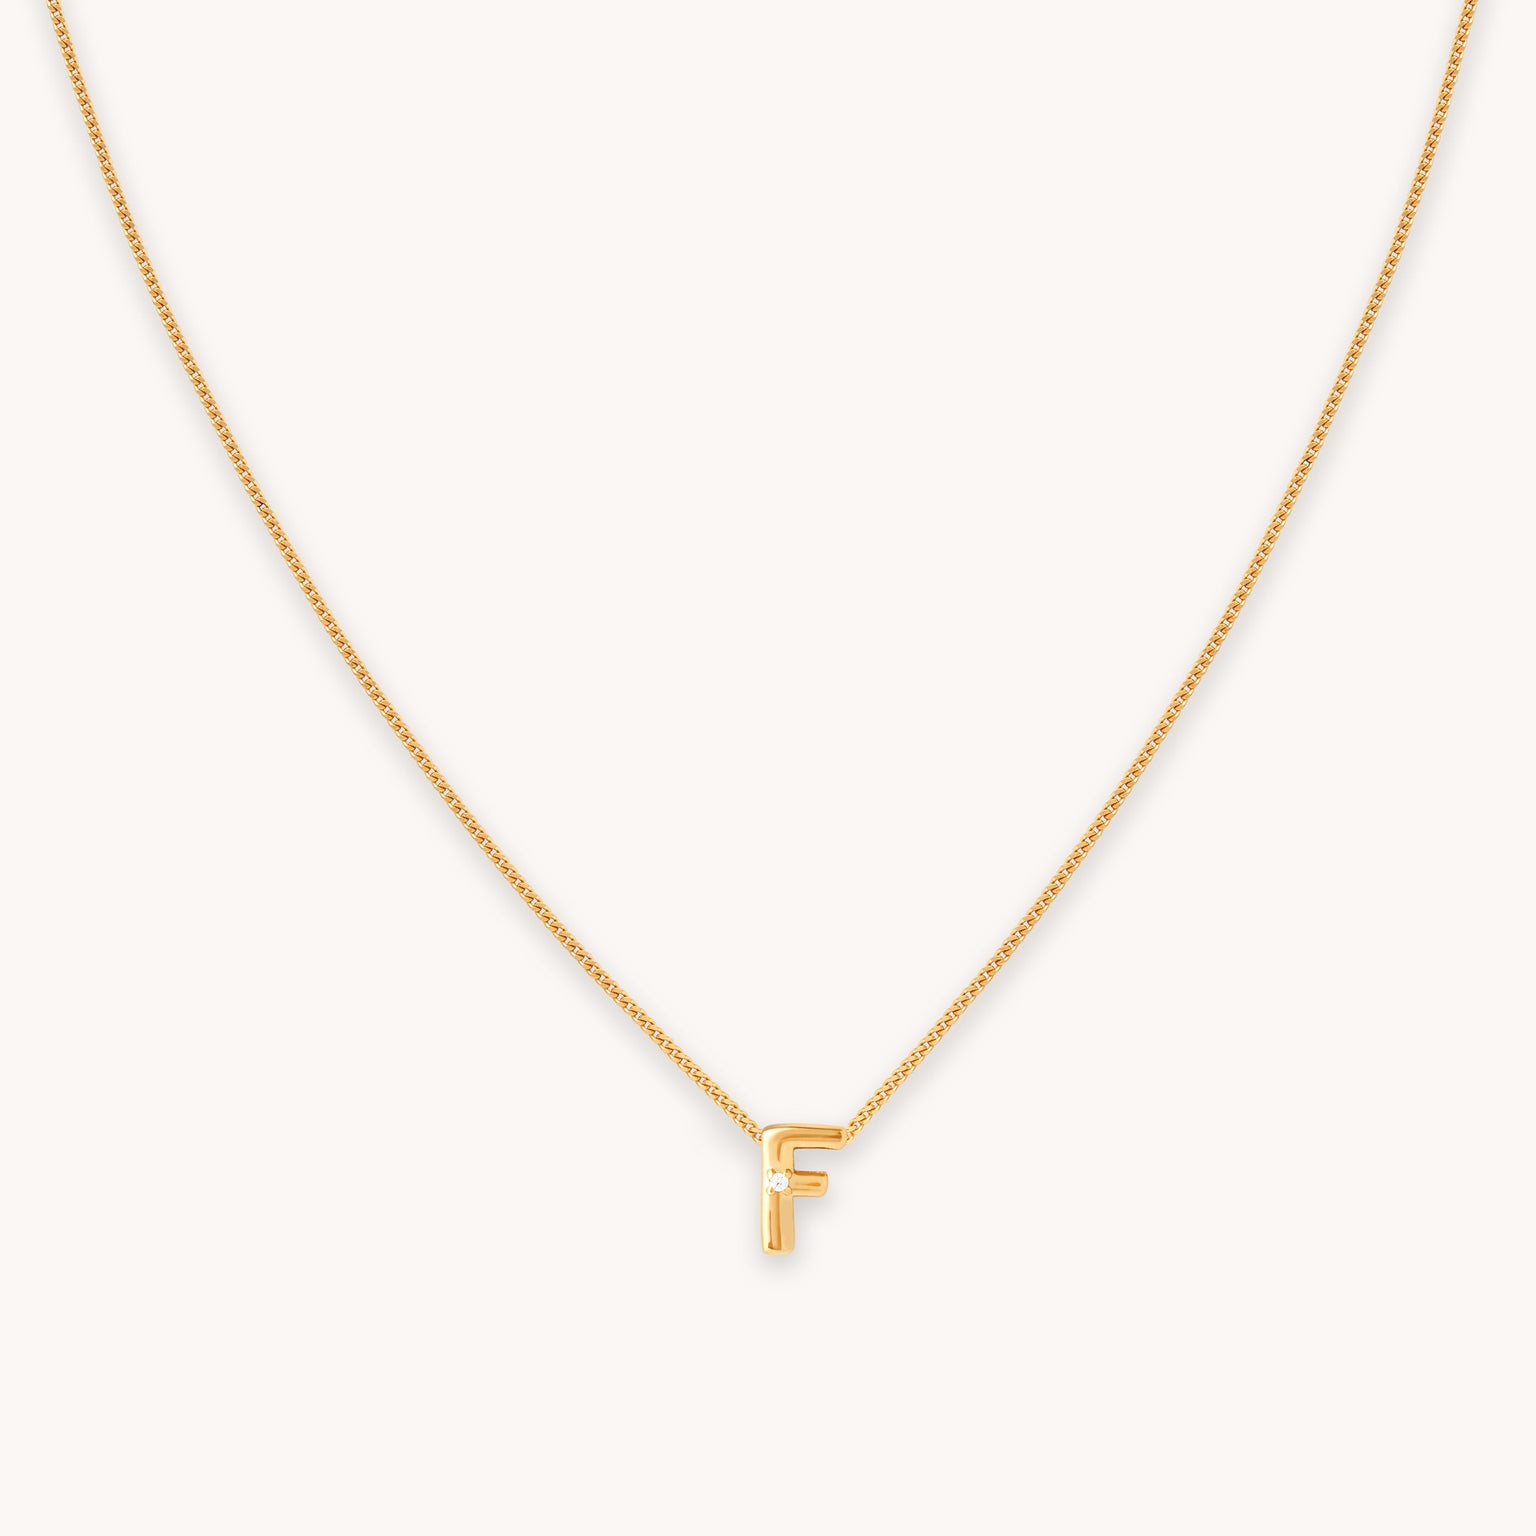 F Initial Pendant Necklace in Gold